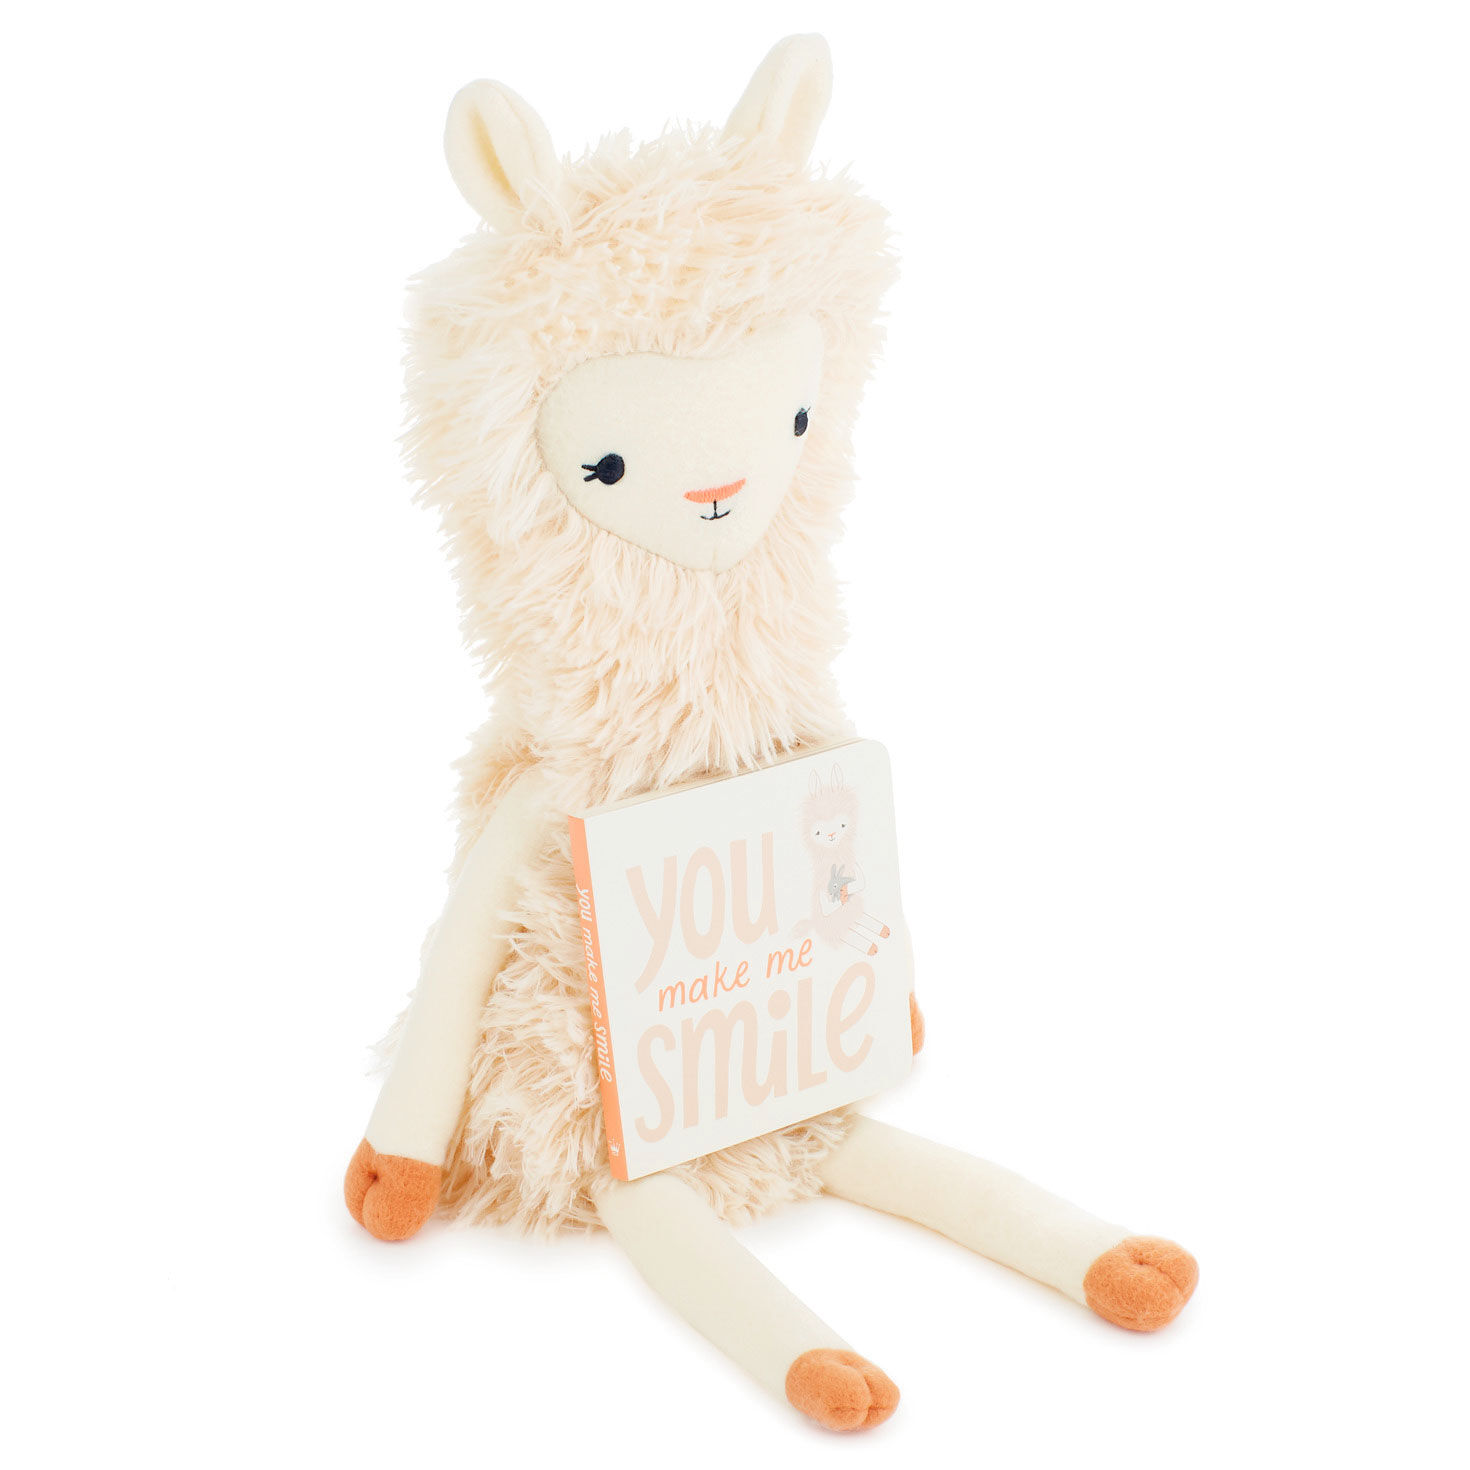 MopTops Llama Stuffed Animal With You Make Me Smile Board Book for only USD 34.99 | Hallmark